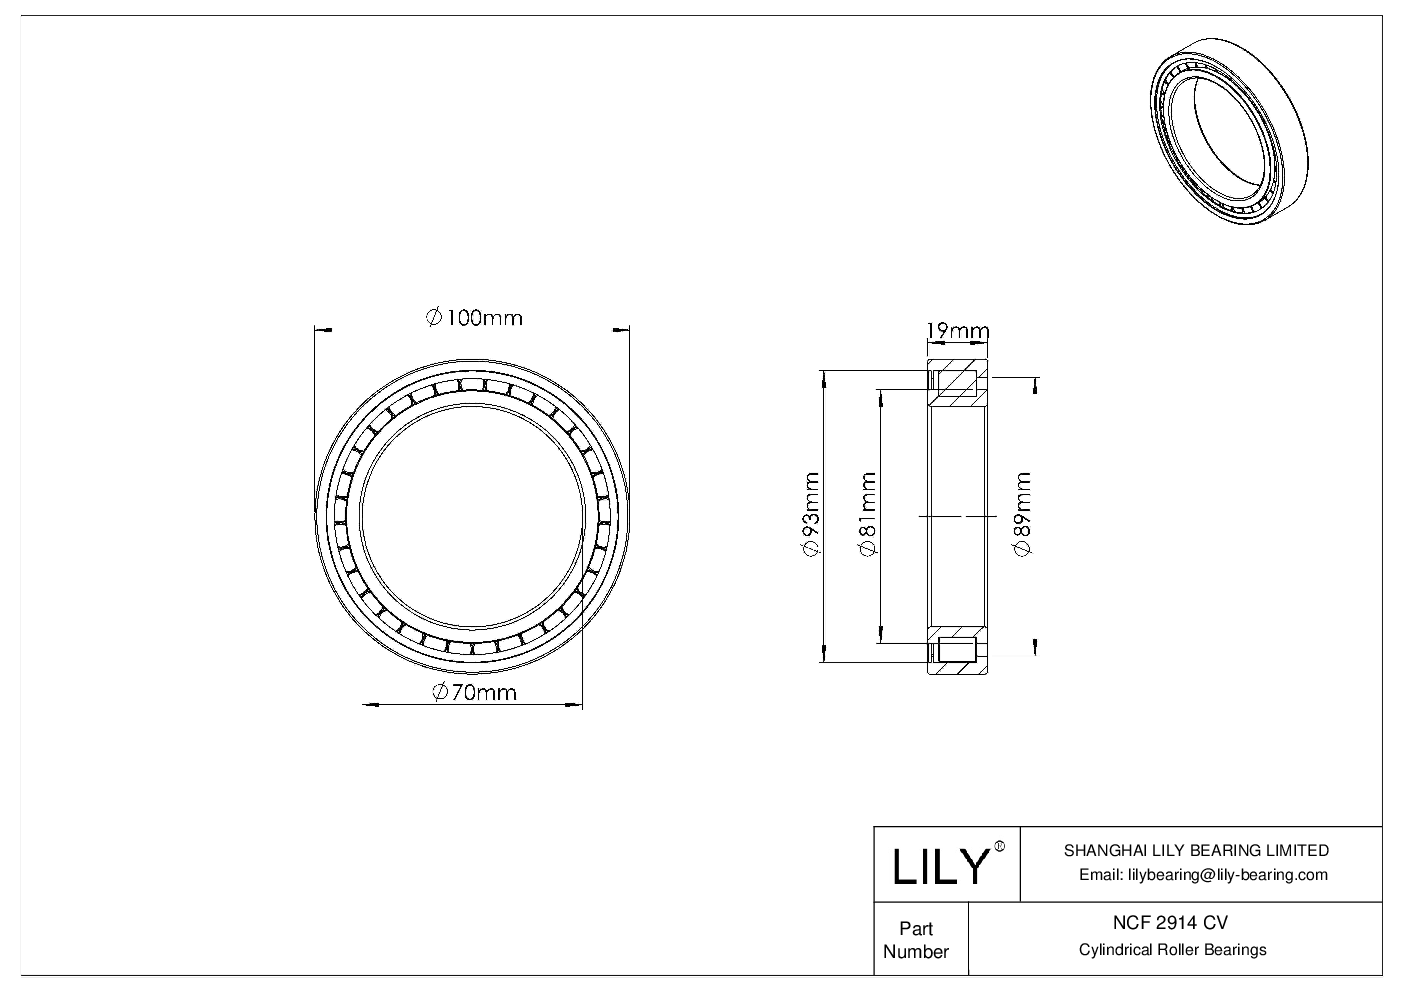 NCF 2914 CV Single Row Full Complement Cylindrical Roller Bearings cad drawing